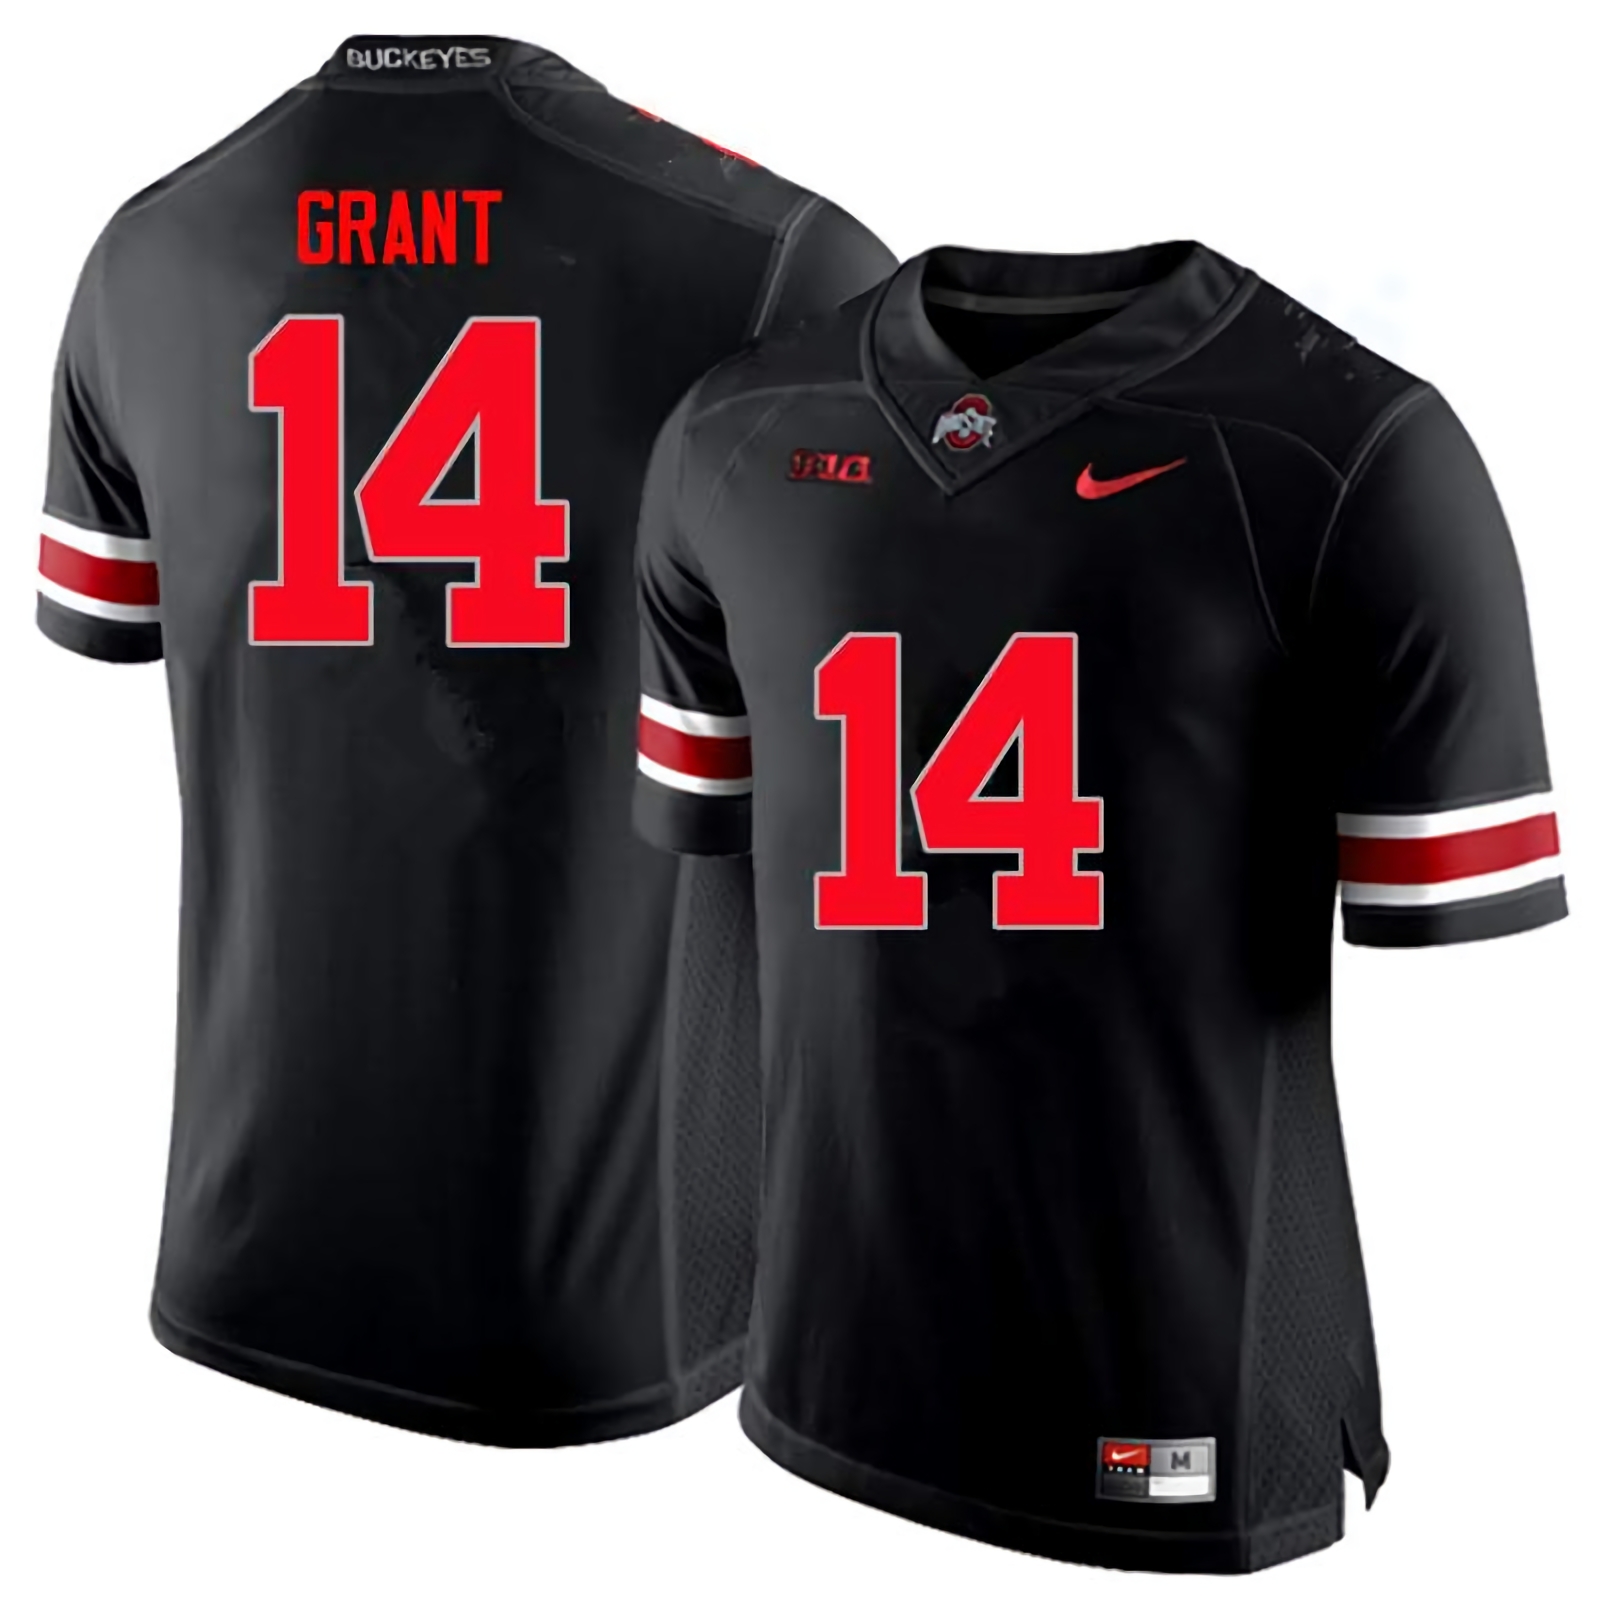 Curtis Grant Ohio State Buckeyes Men's NCAA #14 Nike Black Limited College Stitched Football Jersey RNJ7656VK